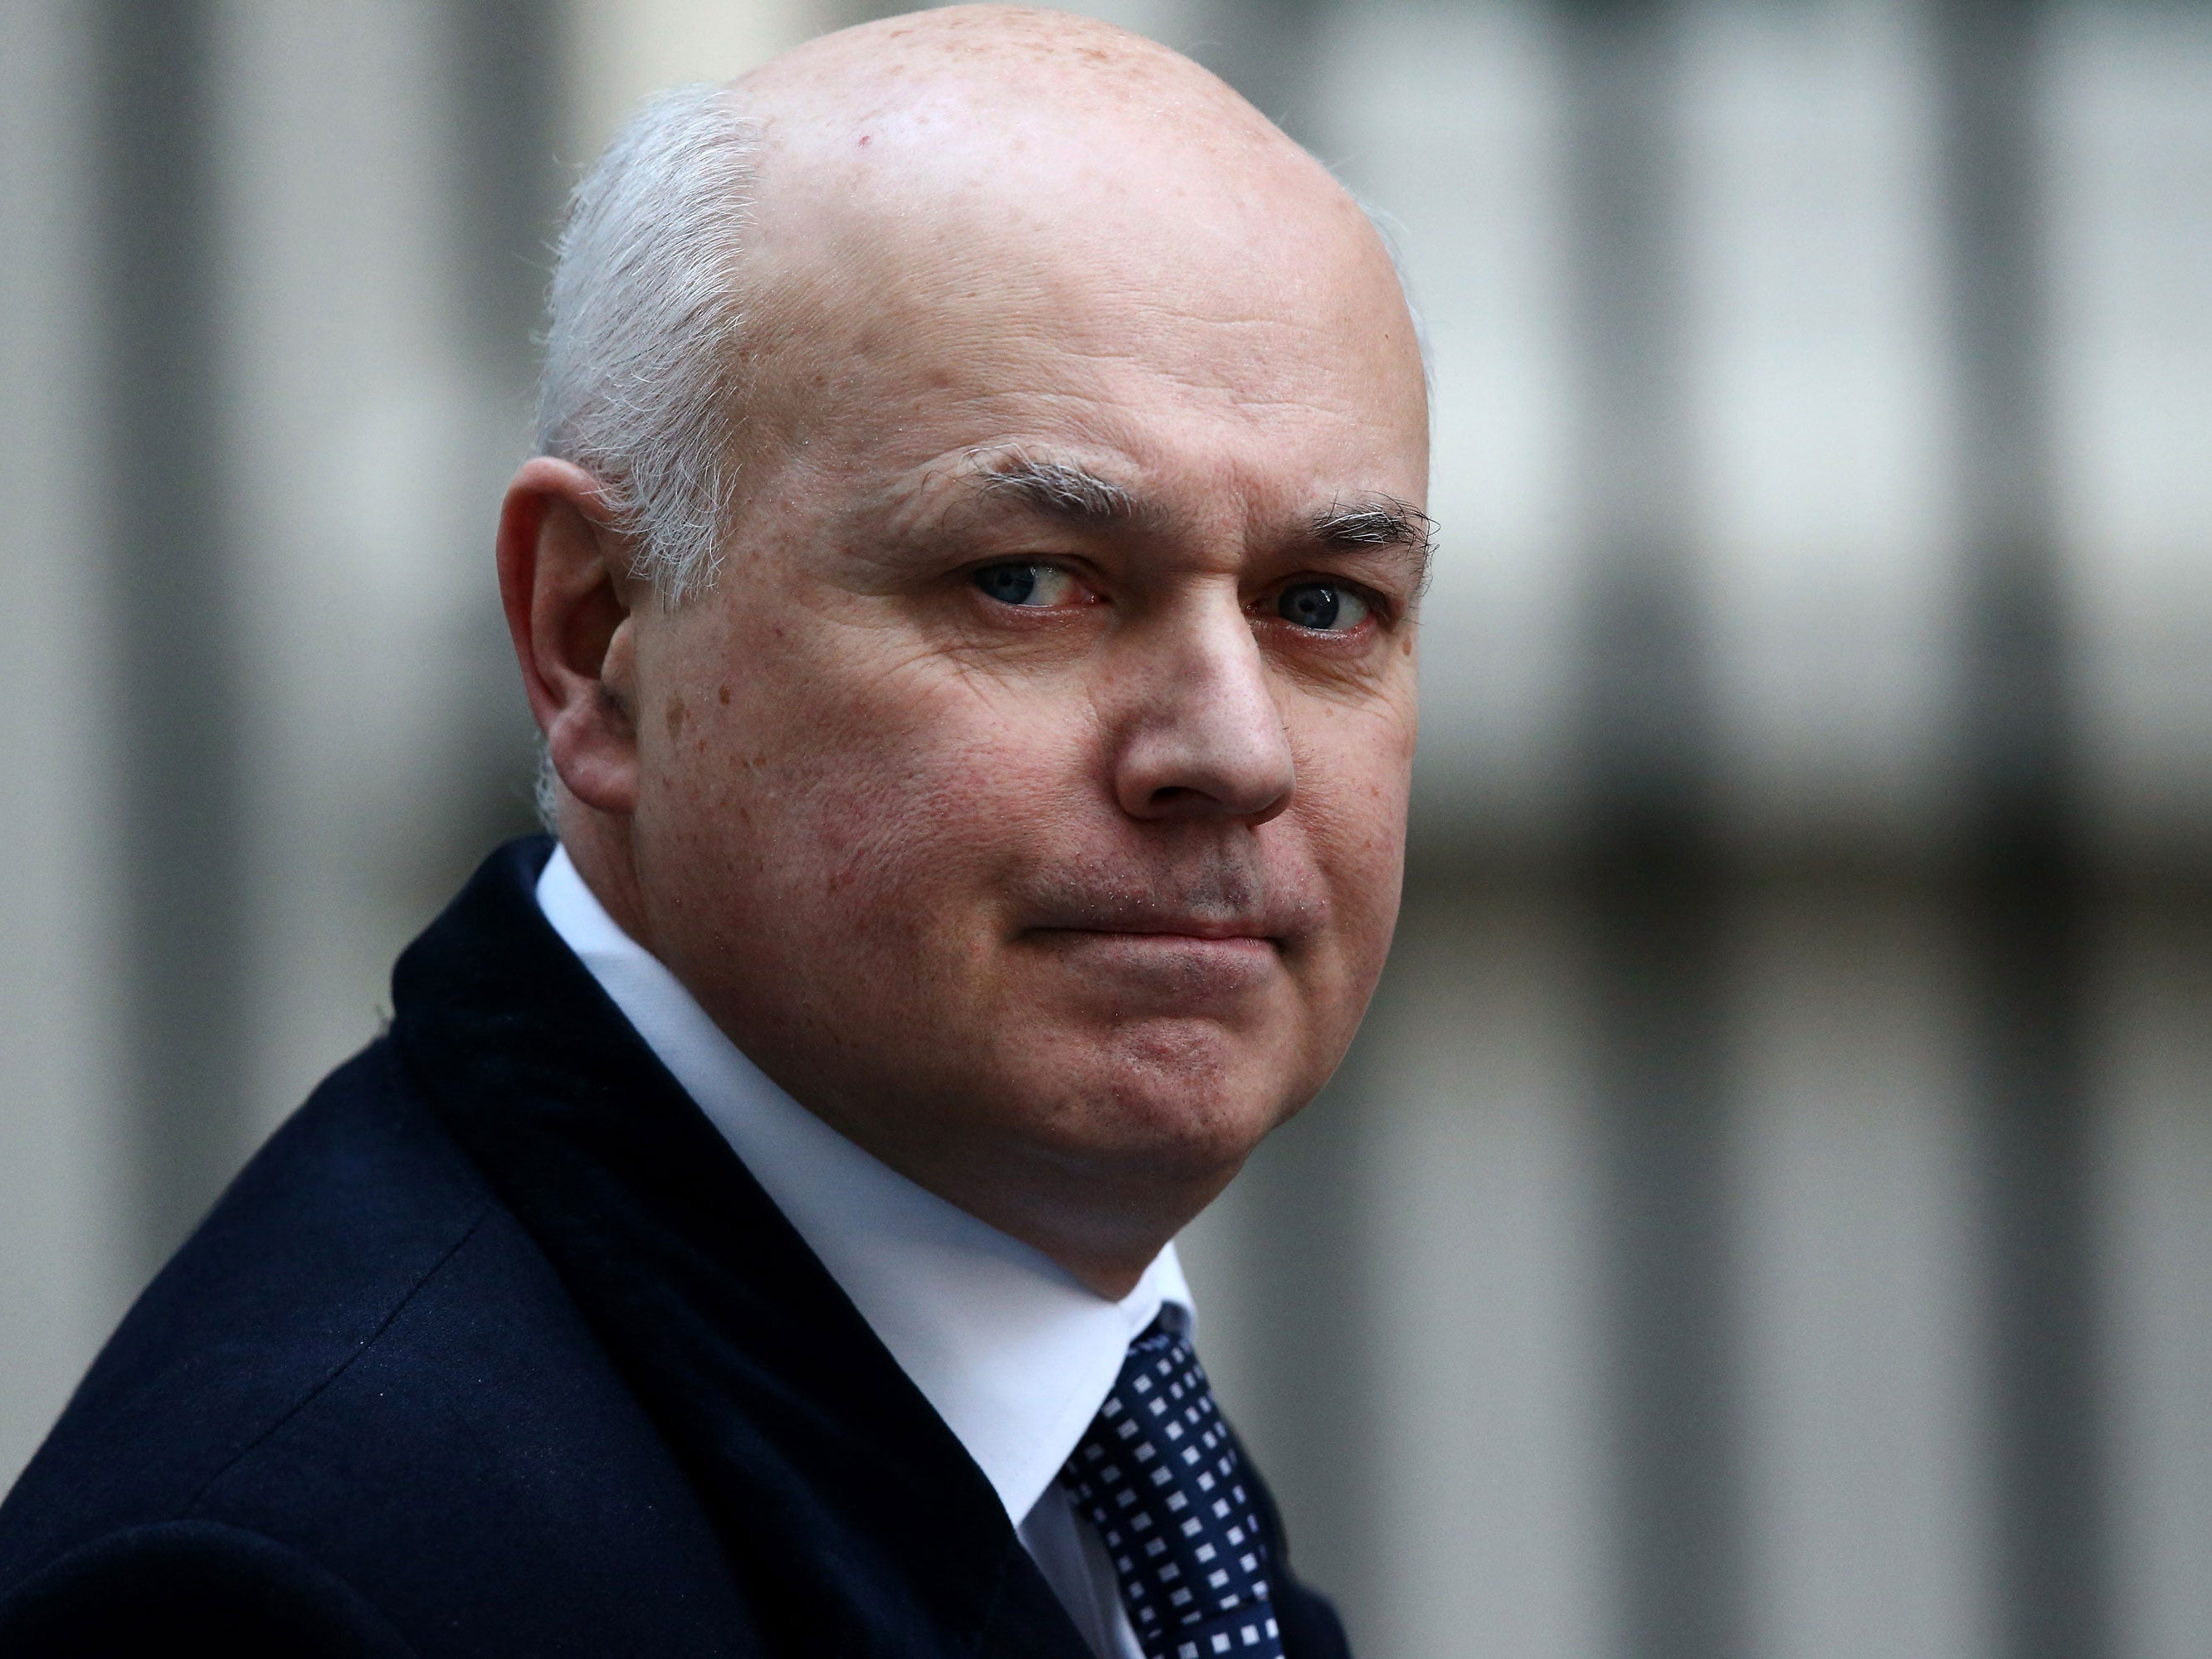 Iain Duncan Smith has come under fire after the DWP admitted it had fabricated quotes in a bid to promote its benefit sanctions regime (Getty)